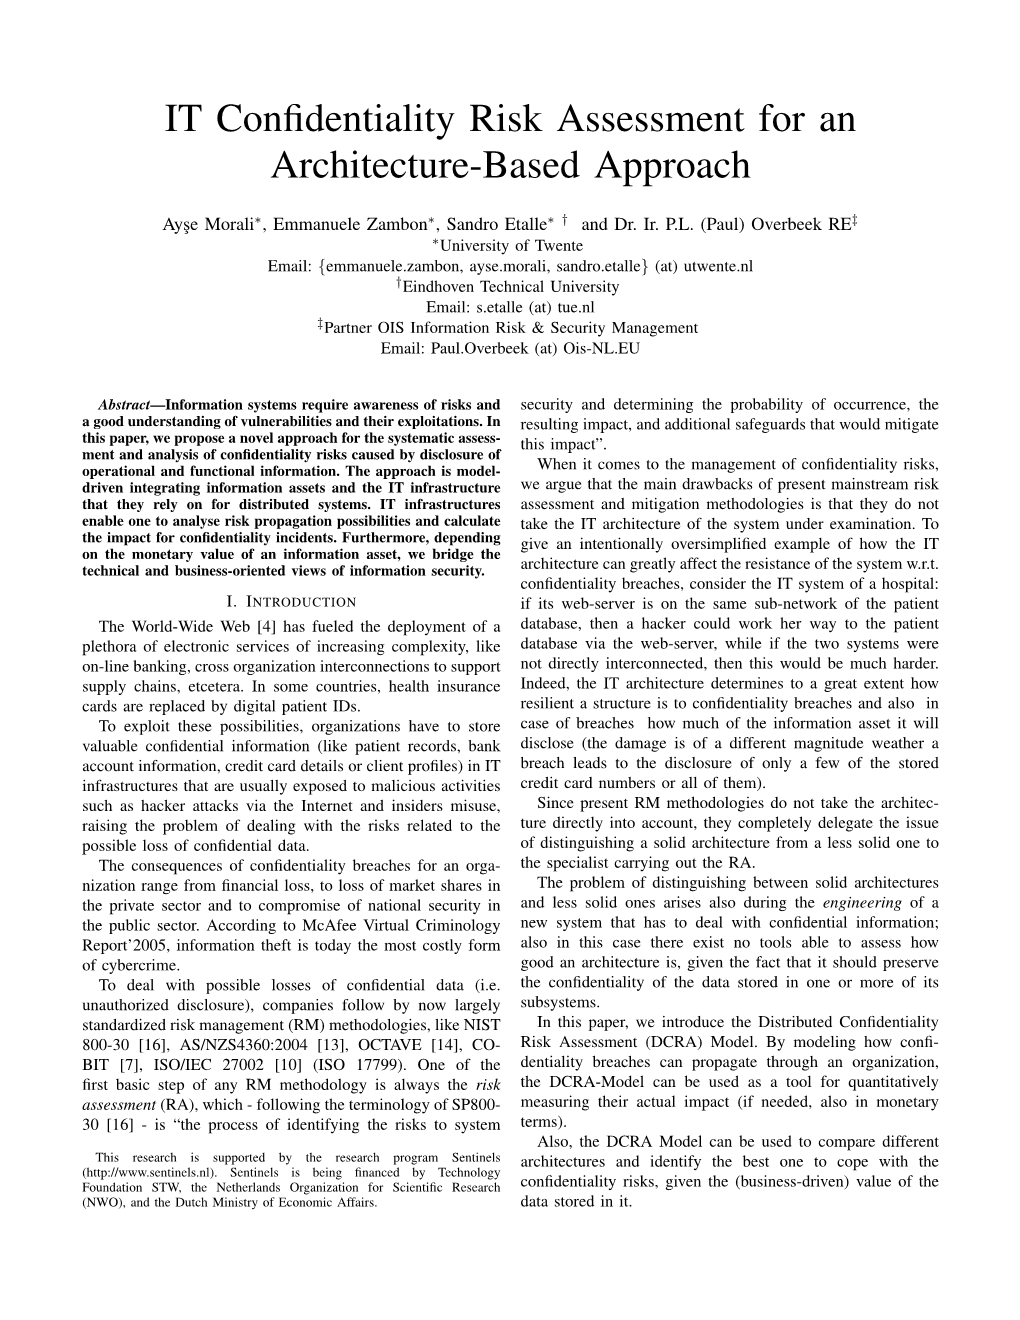 IT Confidentiality Risk Assessment for an Architecture-Based Approach